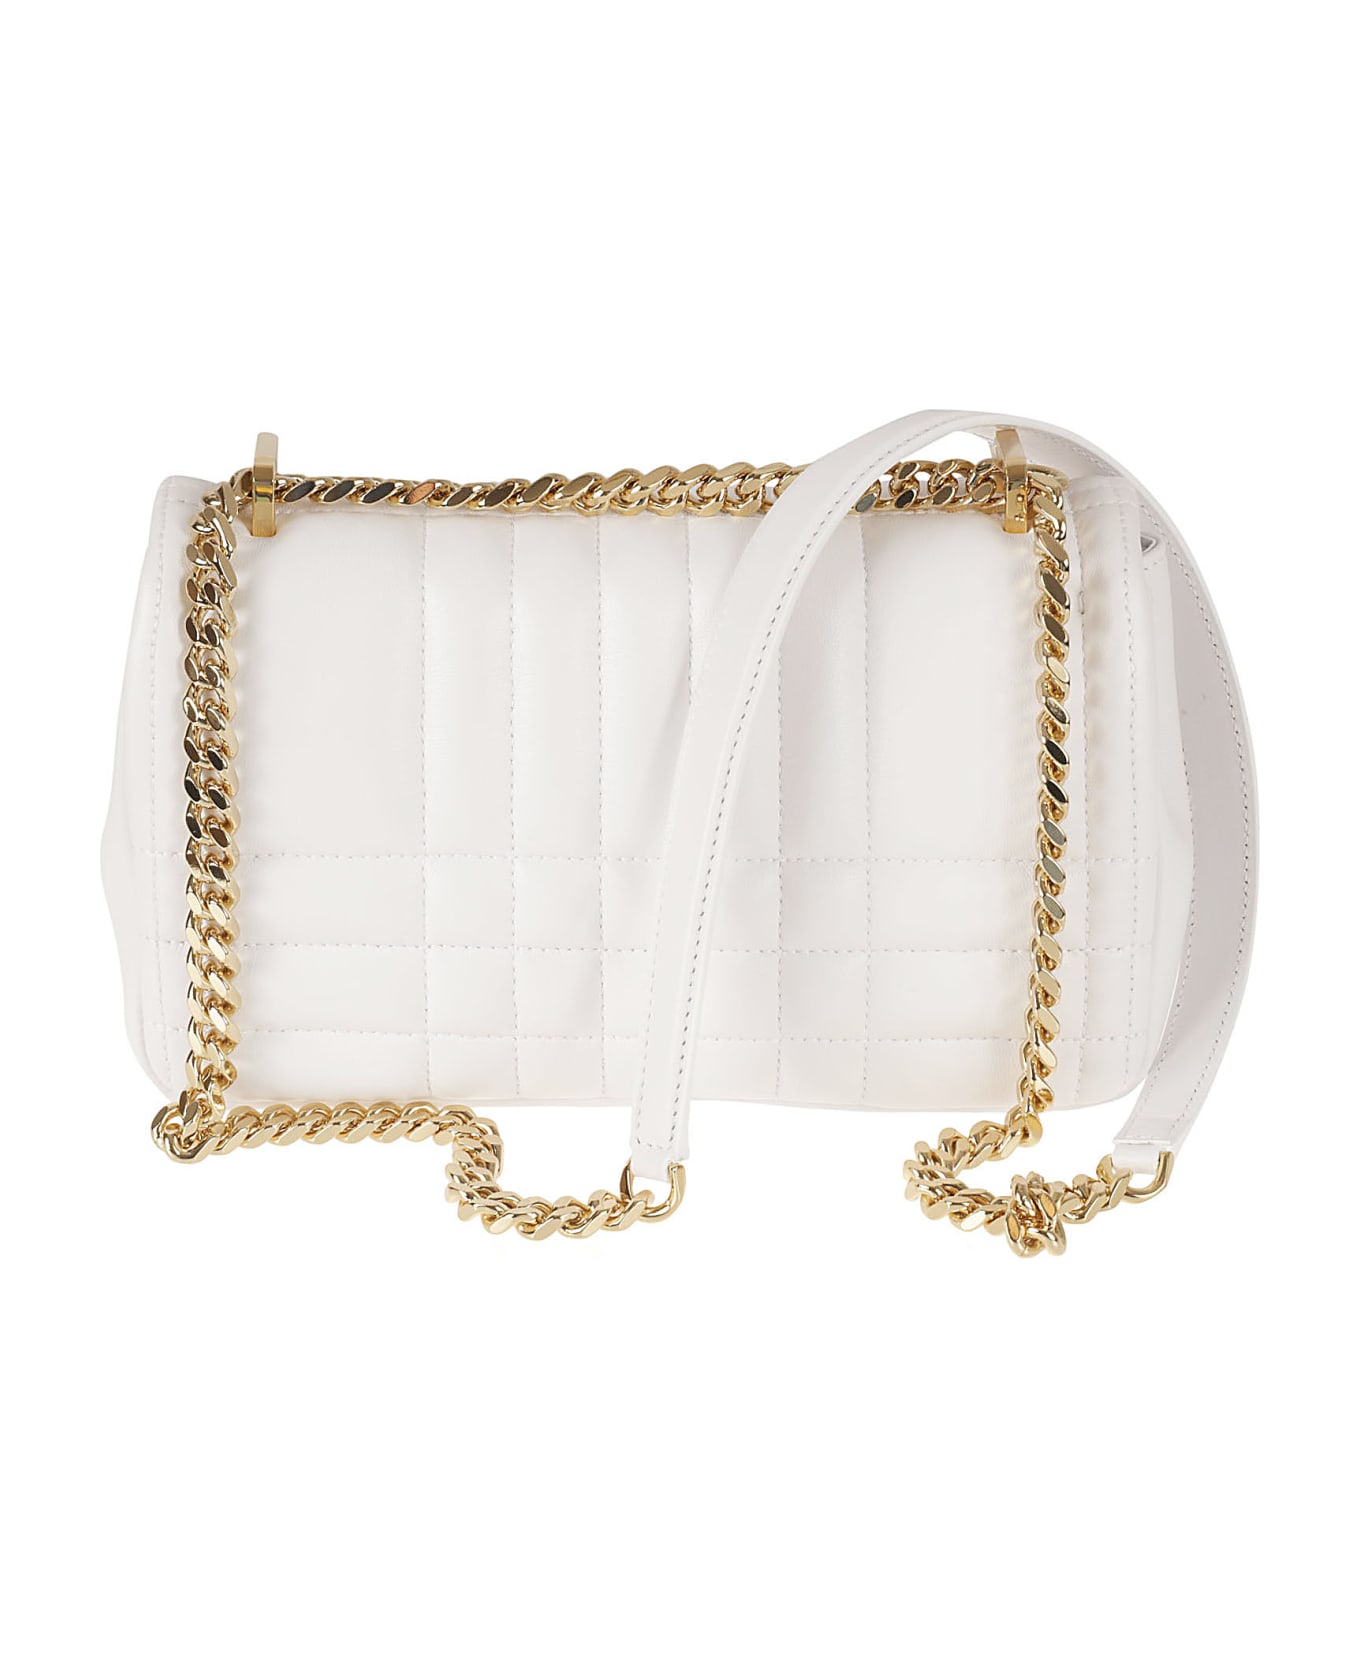 Burberry Chain Quilted Shoulder Bag - OPTIC WHITE ショルダーバッグ